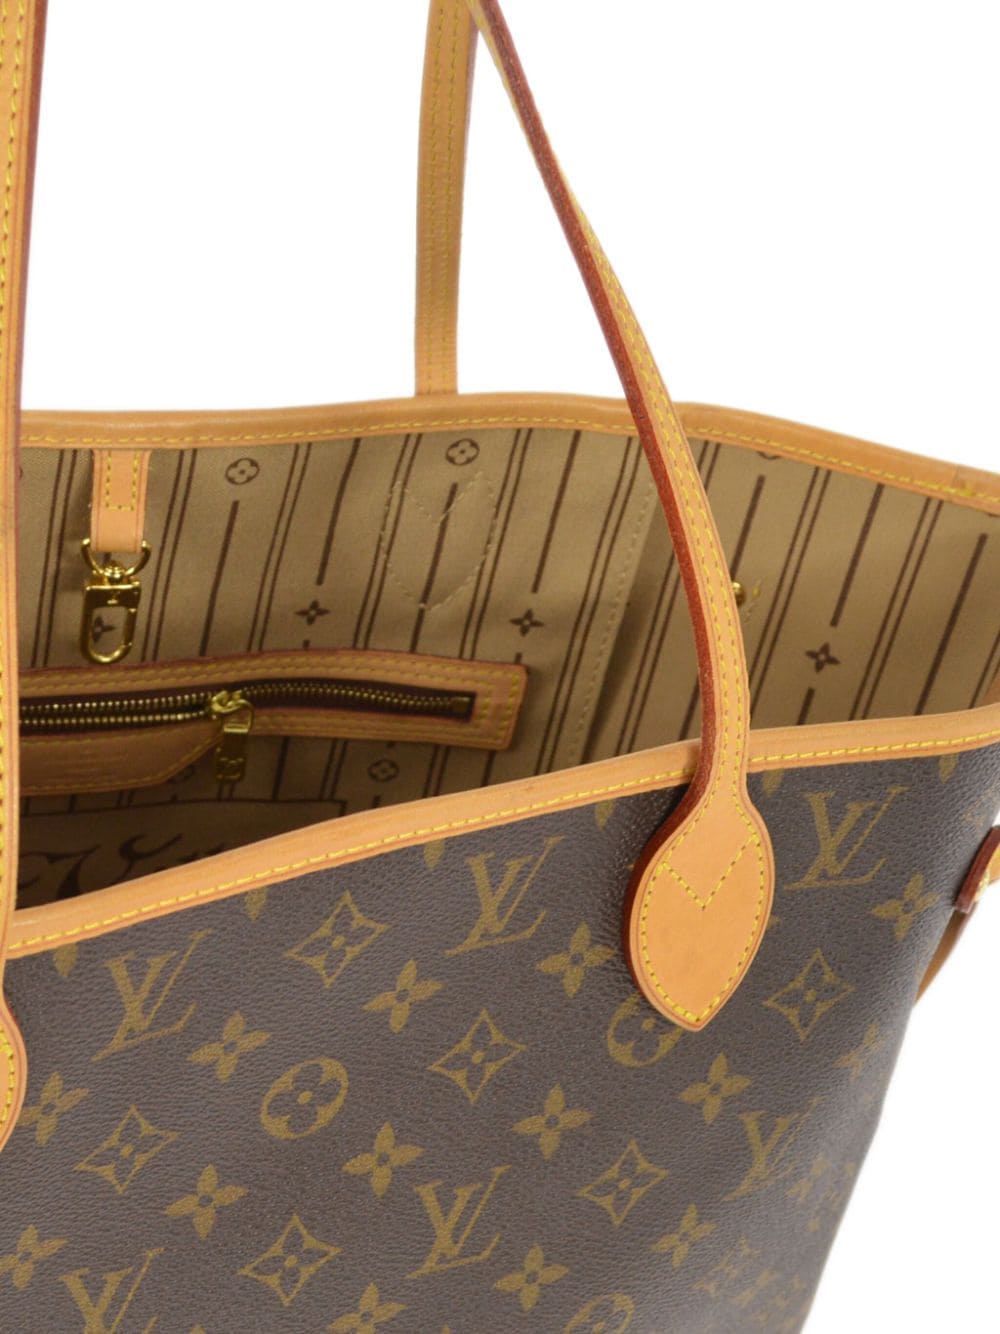 Louis Vuitton x Stephen Sprouse 2012 pre-owned North South Leopard Jacquard Tote  Bag - Farfetch